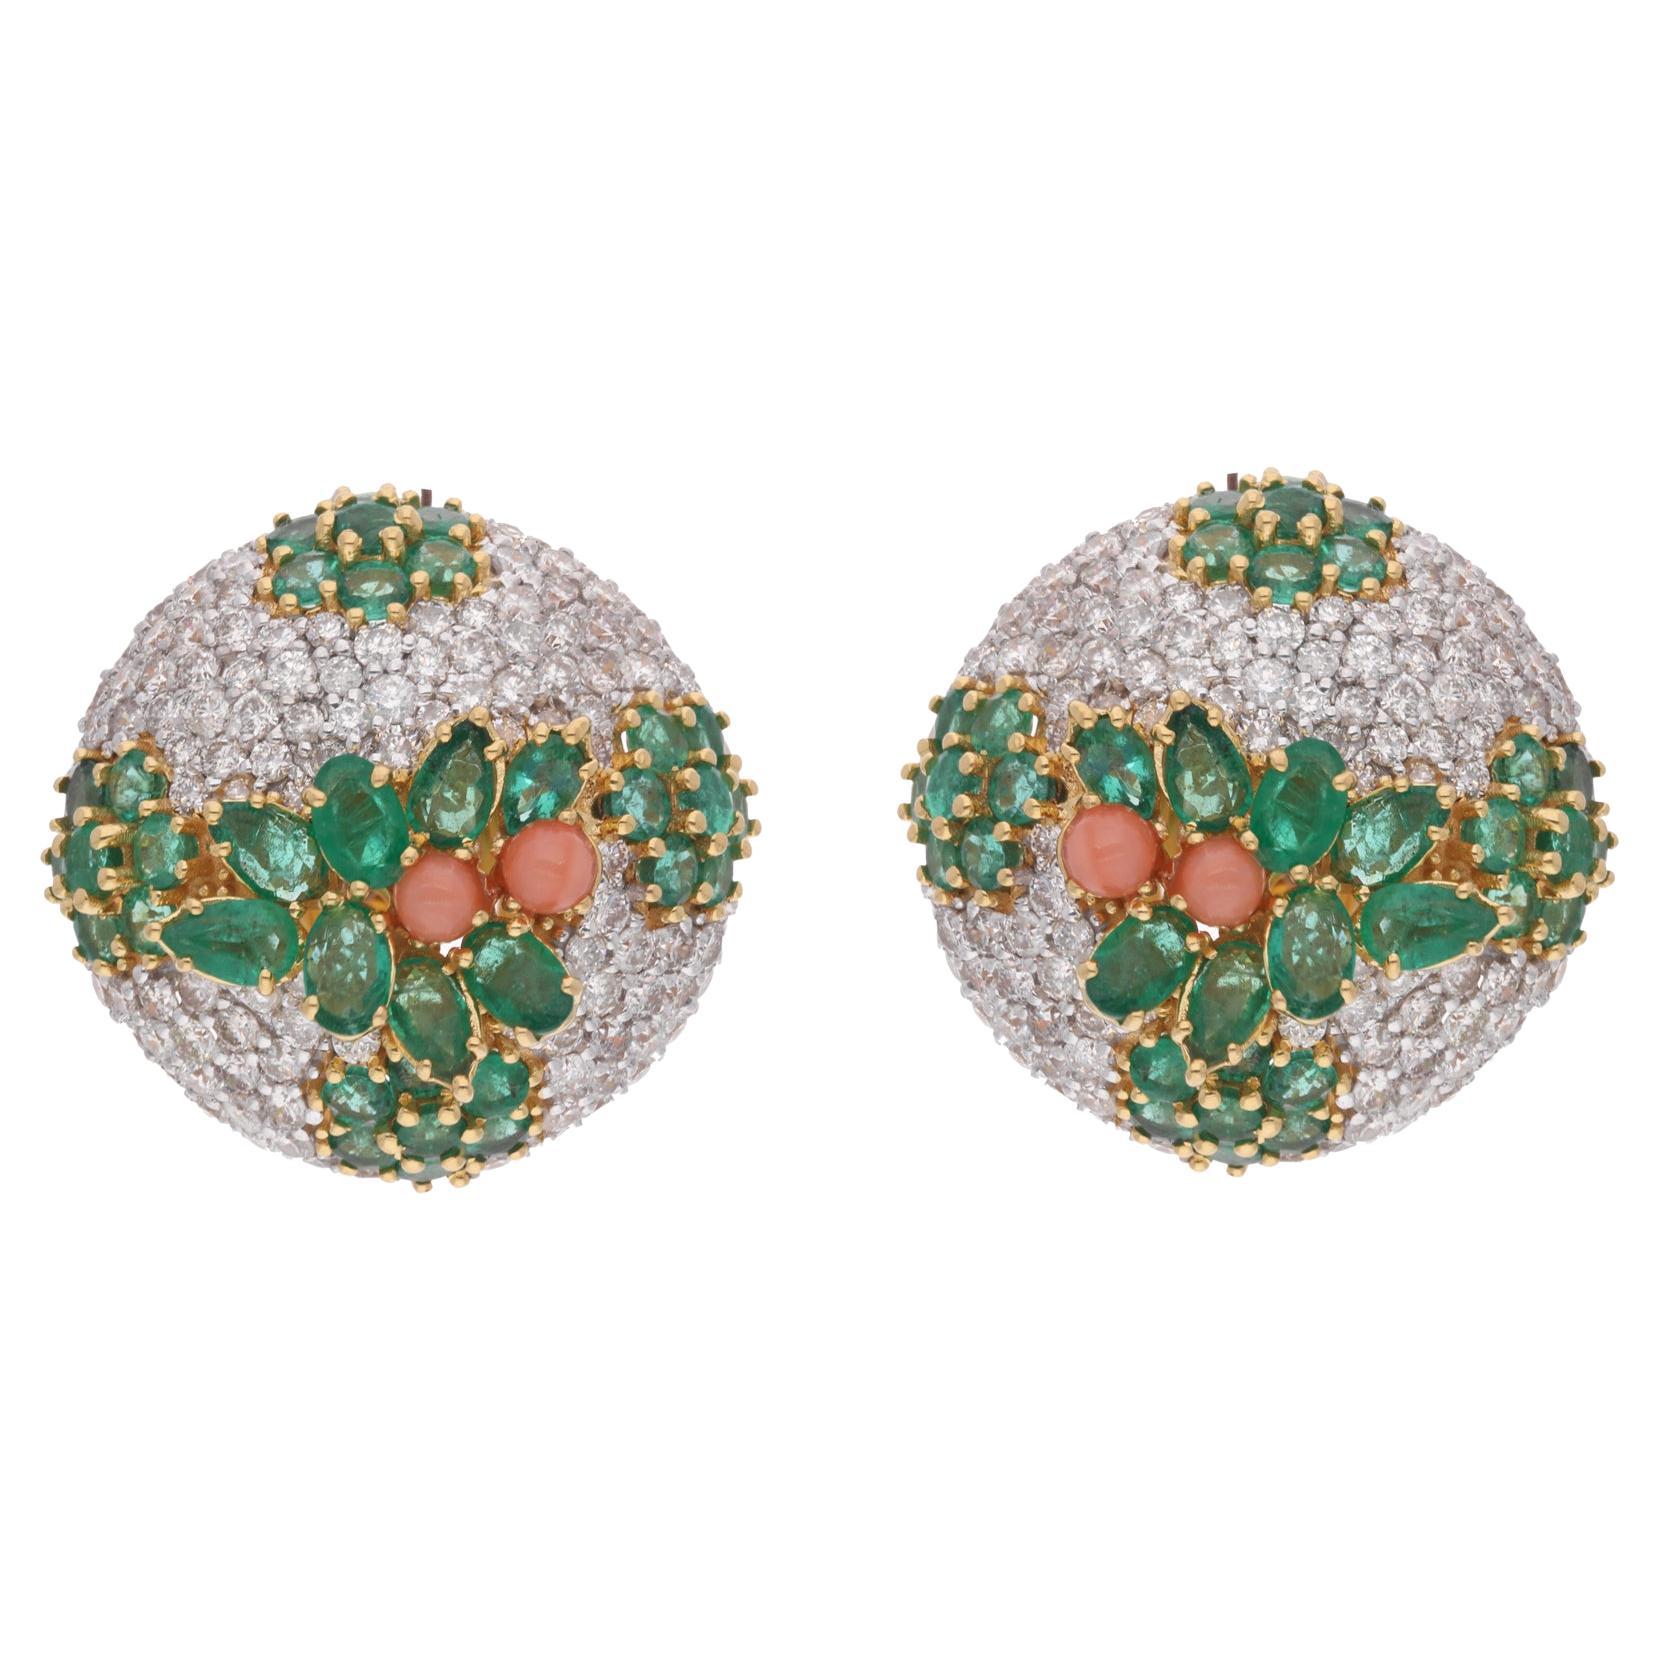 Spectrum Jewels Coral Emerald Gemstone Earrings Diamond 18K White Yellow Gold For Sale